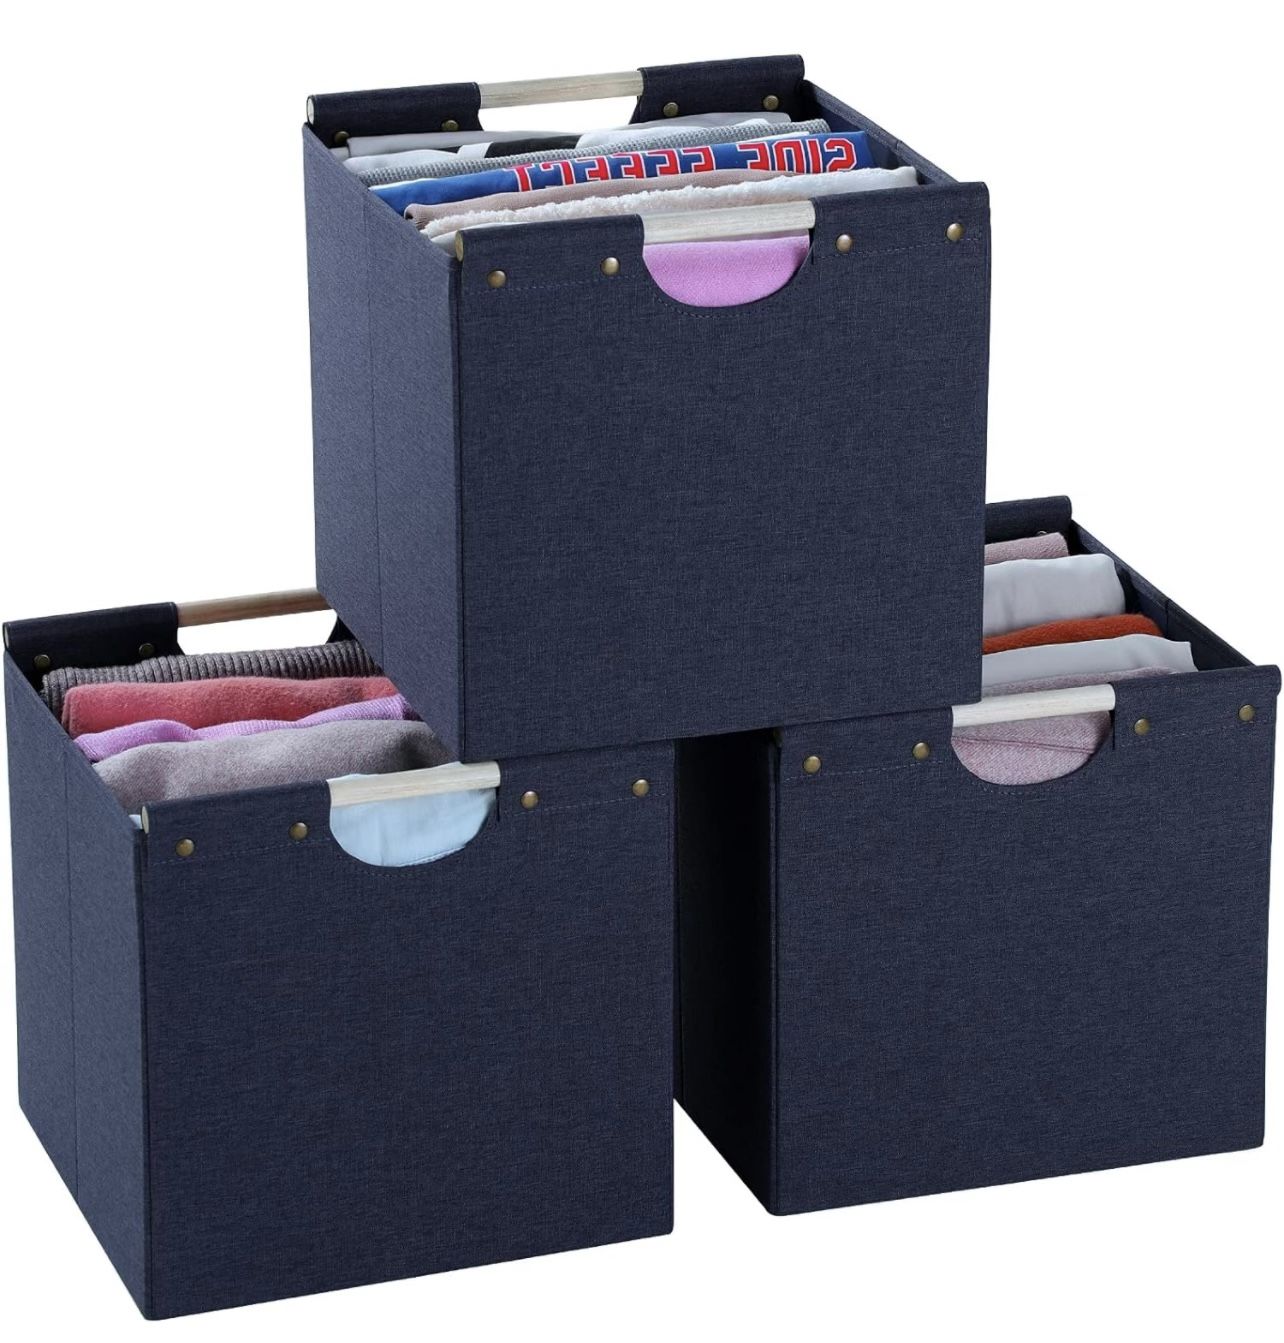 MORMAX Foldable Cube Storage Bins, Linen Fabric, 12 Inch Storage Cubes with Dual Wooden Handles, Pack Of 3